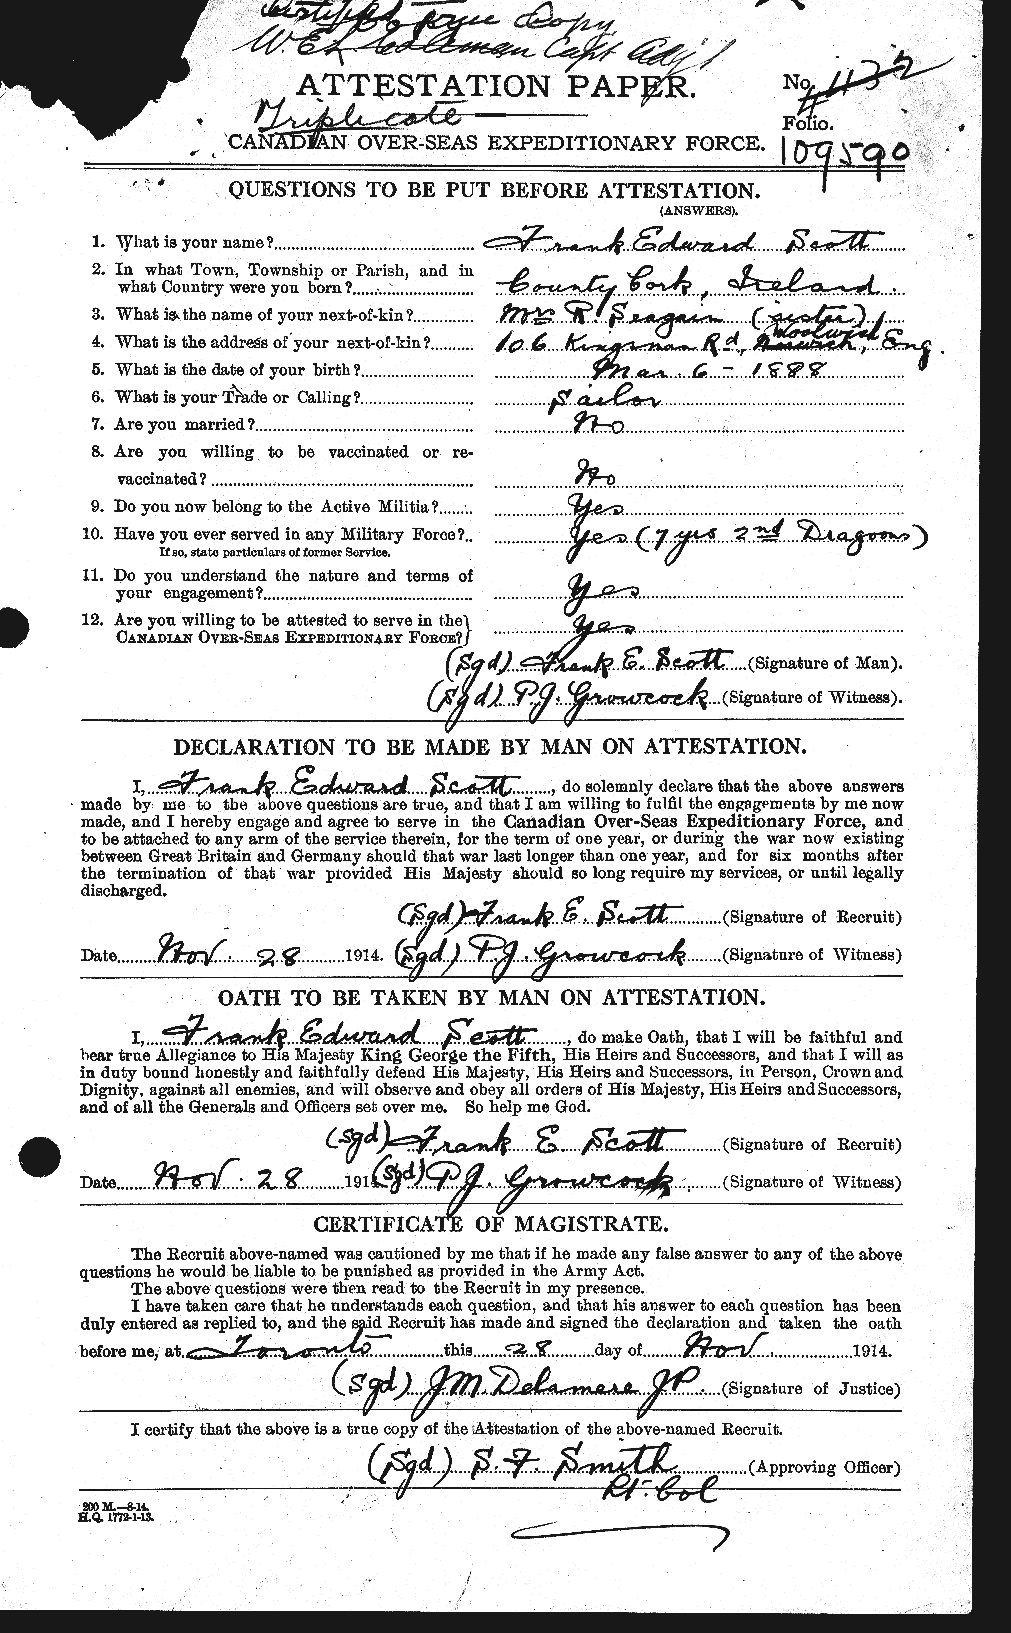 Personnel Records of the First World War - CEF 084702a